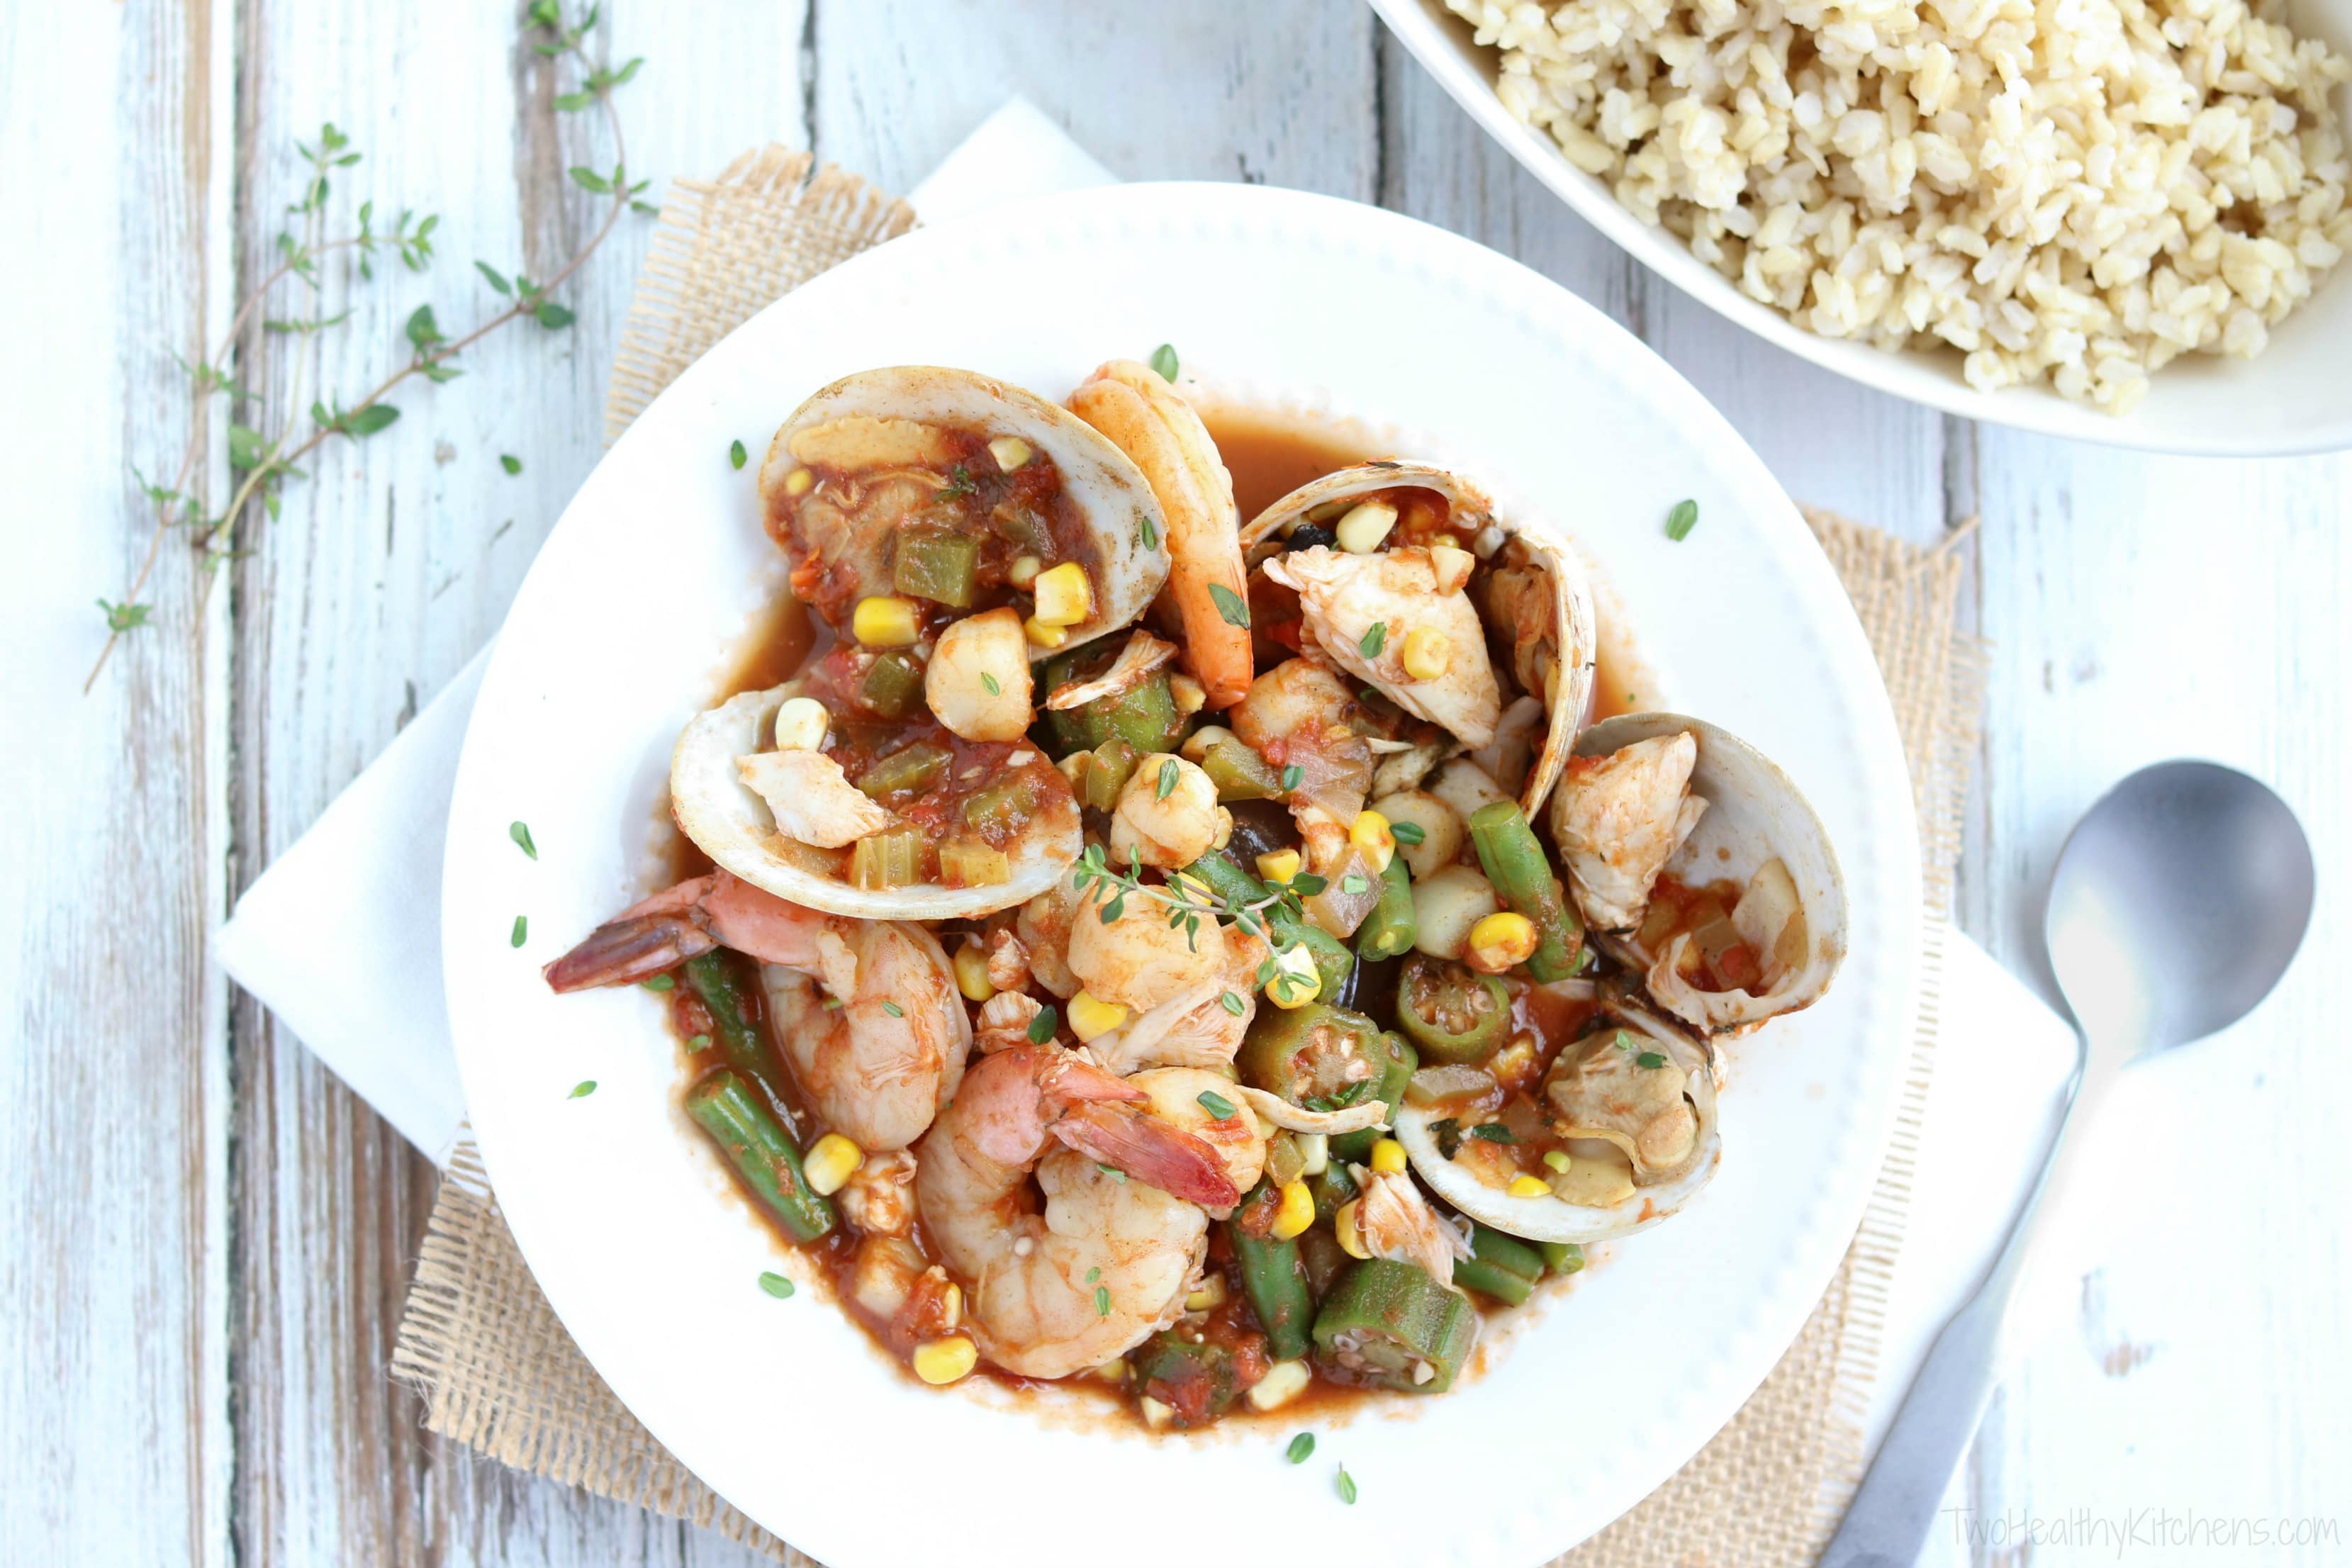 This Sea Island Seafood Stew is a showstopper for dinner parties! But with lots of make-ahead steps, it's also an easy family meal ... perfect when you need a little bit of beach in your life! It’s a mainstay on the menu at the hugely popular Skull Creek Boathouse in Hilton Head, South Carolina. | www.TwoHealthyKitchens.com